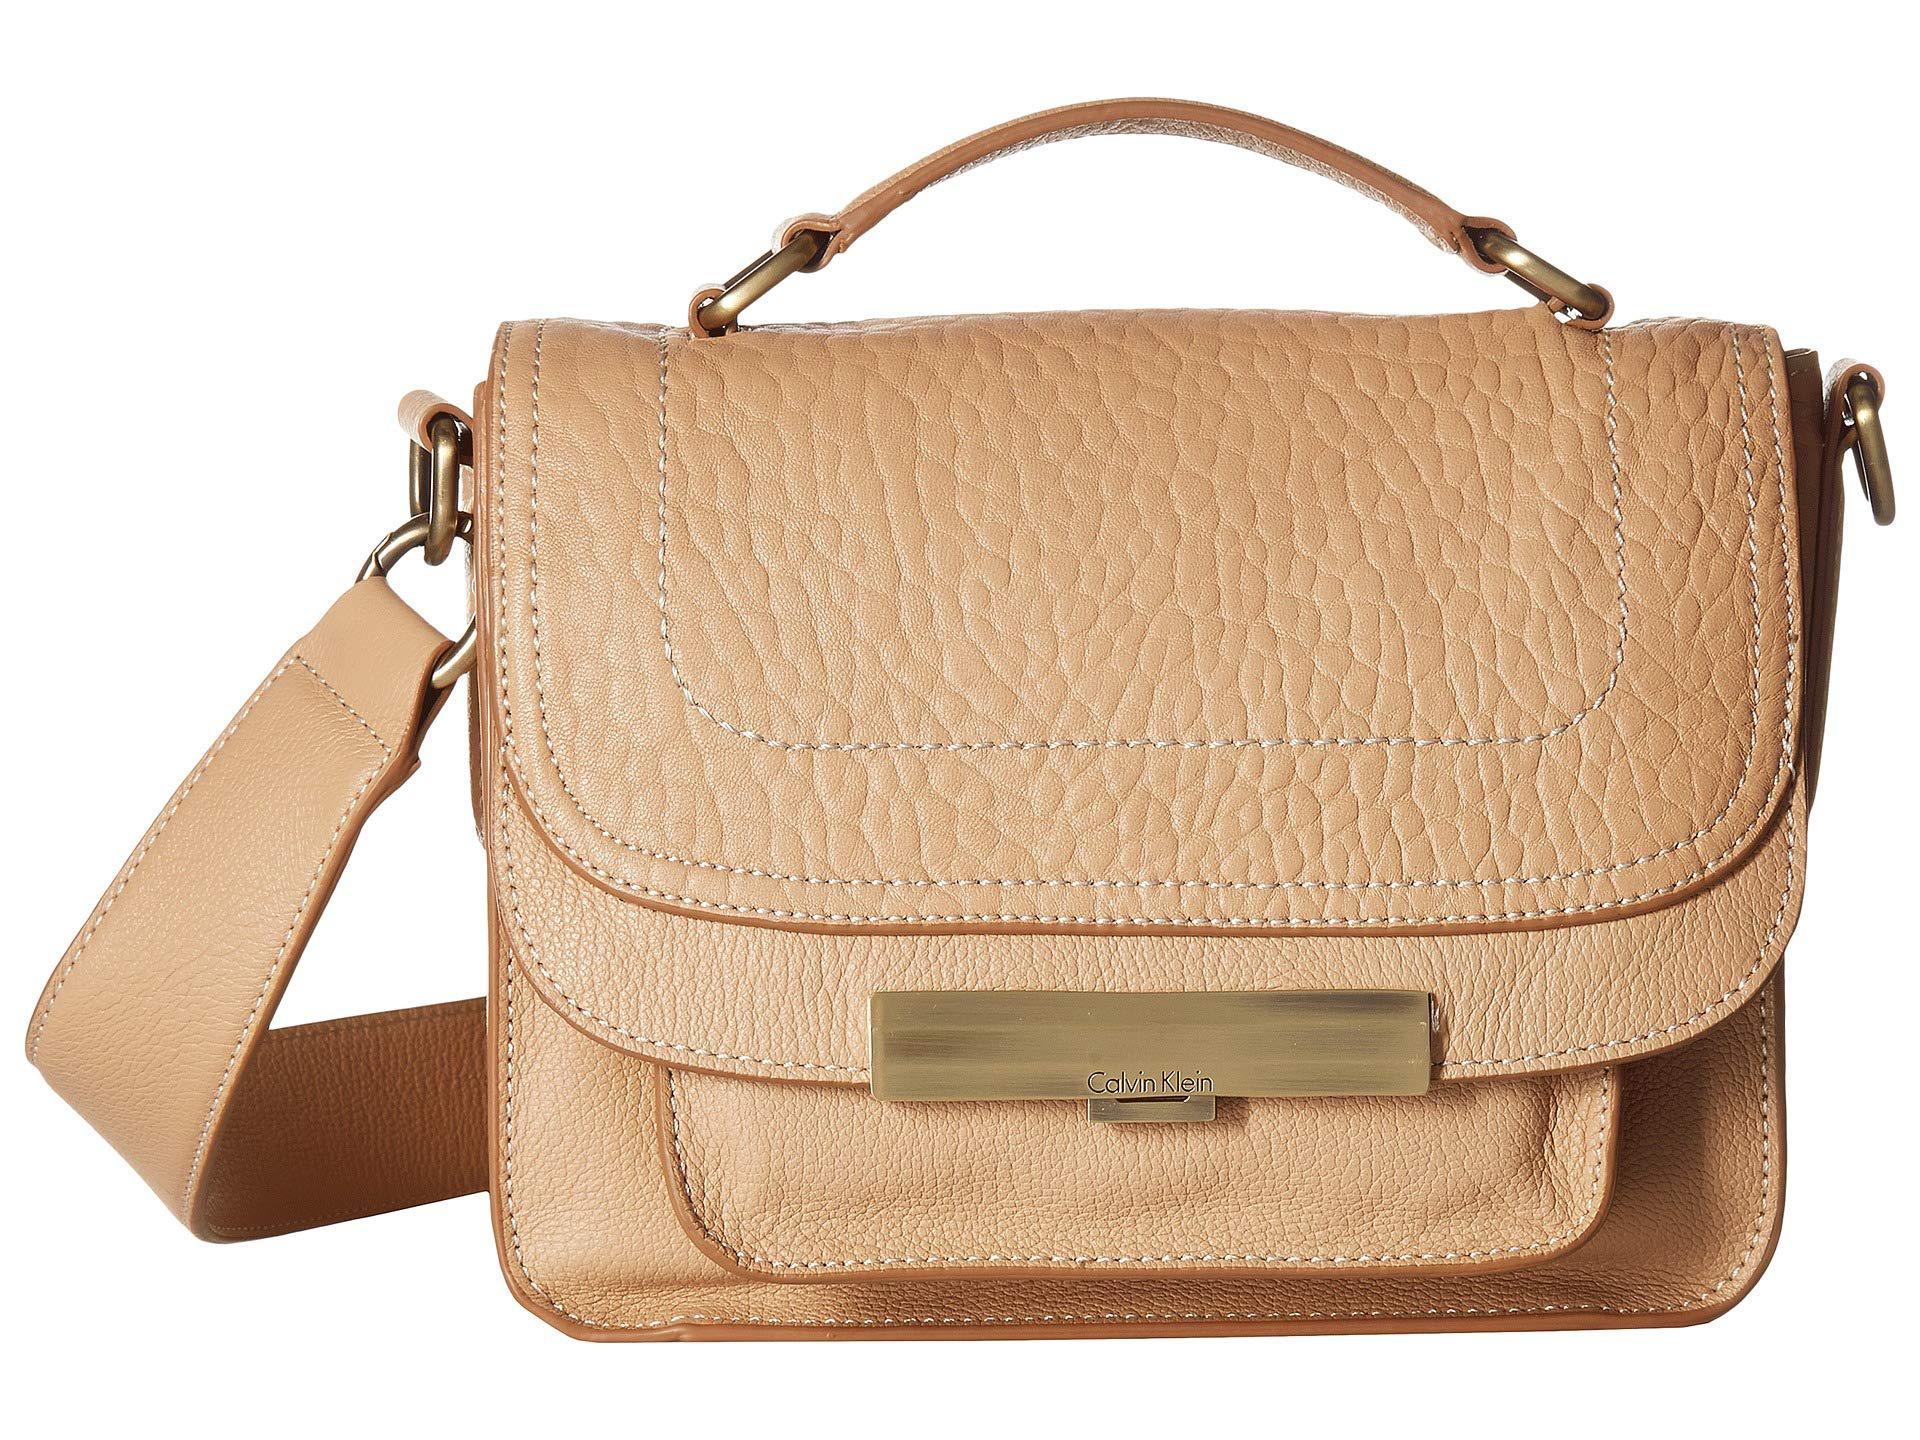 Lyst - Calvin Klein Wendy Goat Leather Small Crossbody in Natural